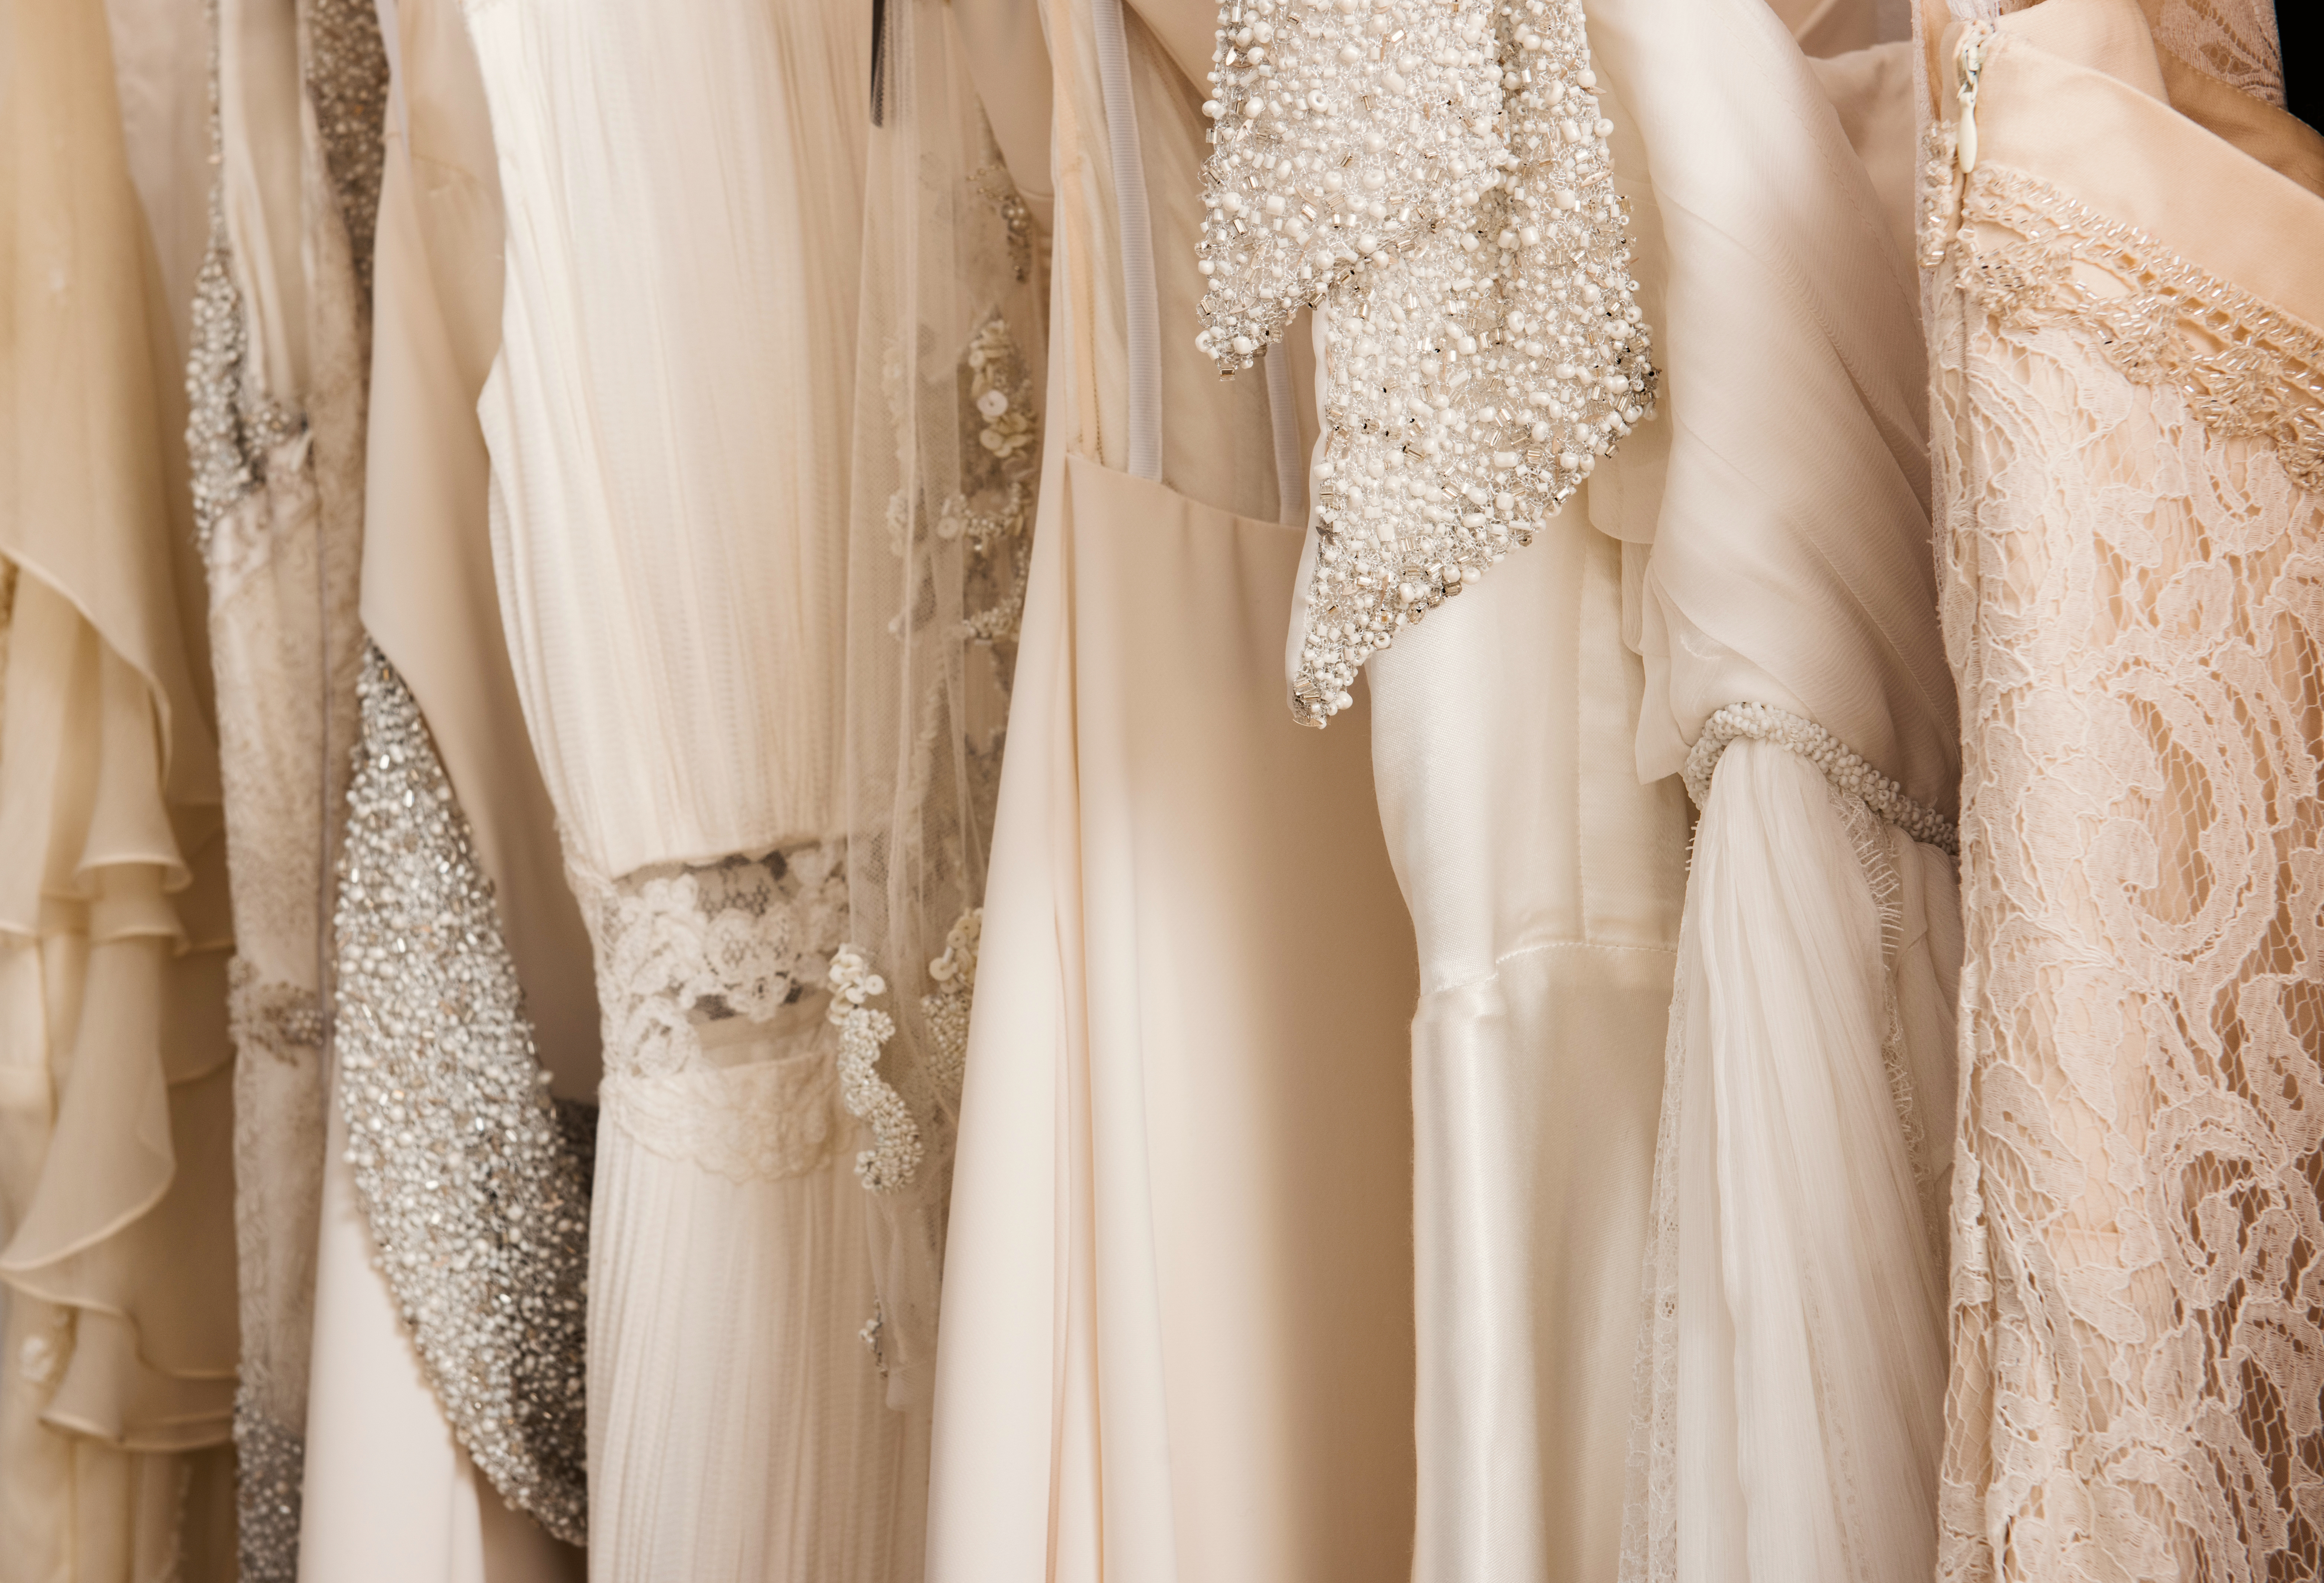 Navigating Pinterest to Find Your Wedding Gown